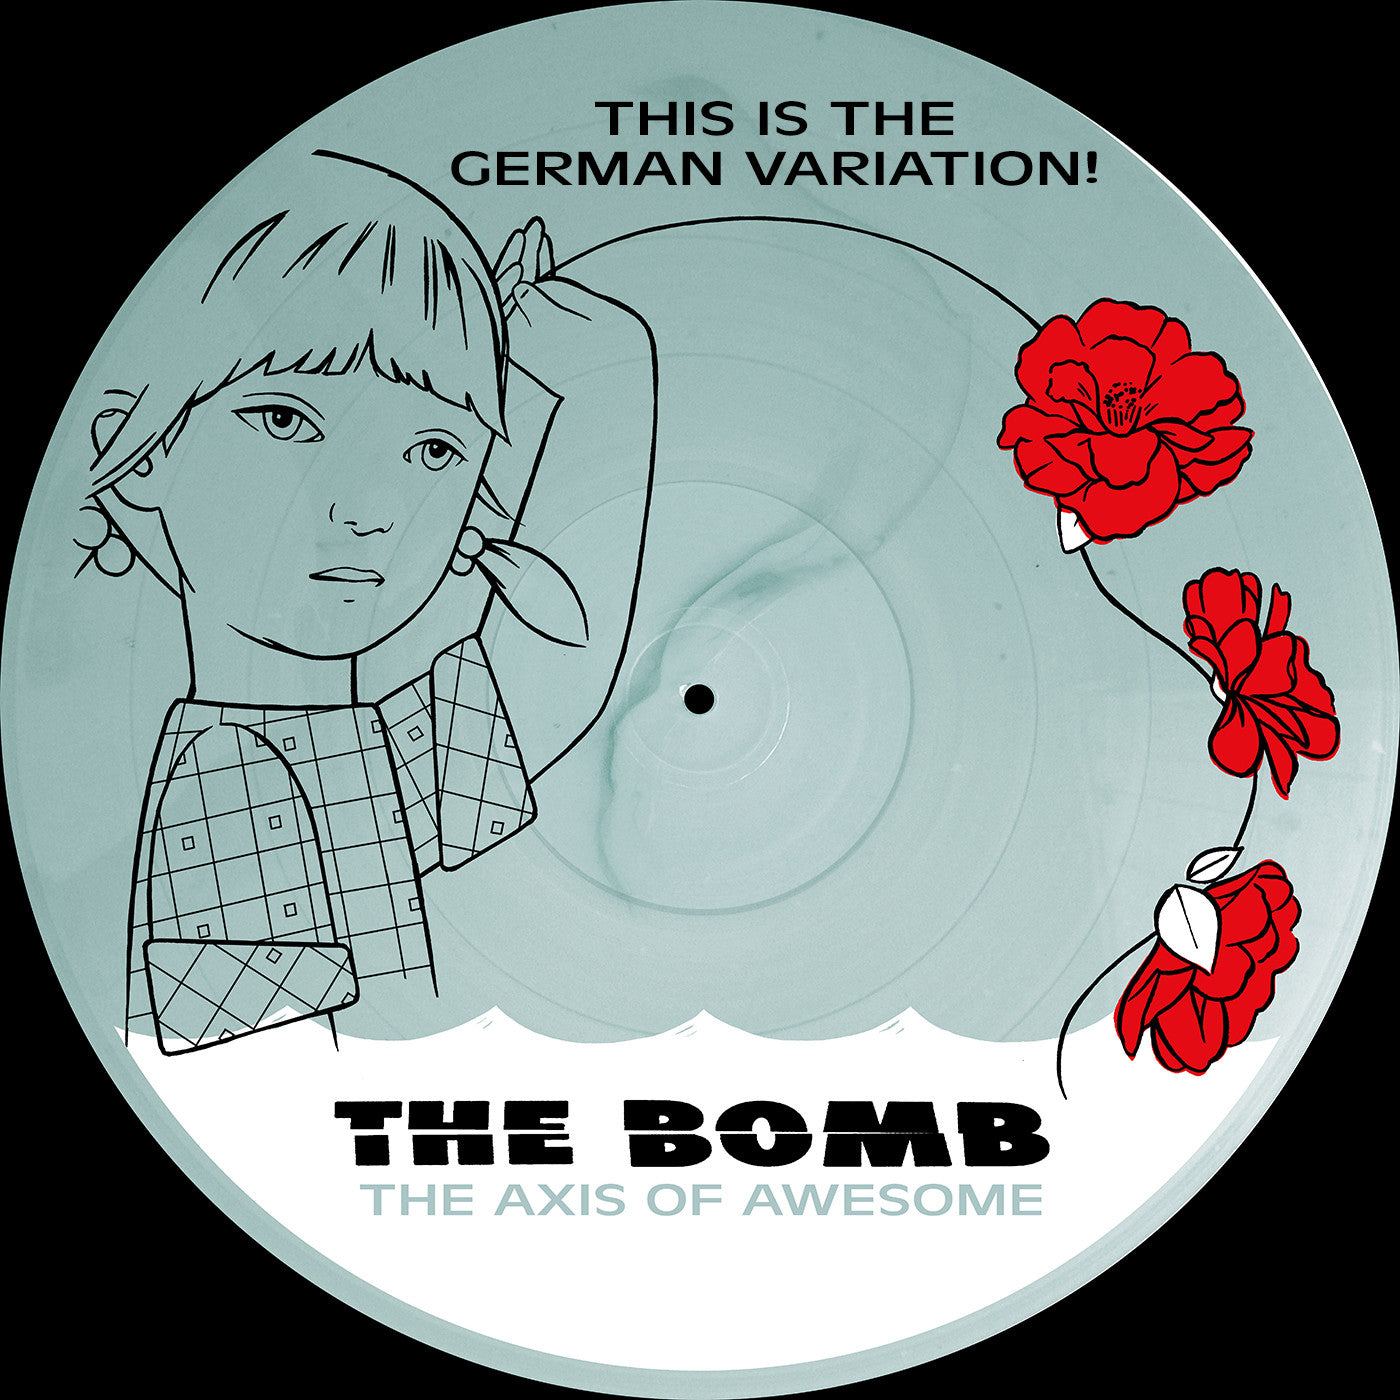 BOMB, THE "The Axis of Awesome"